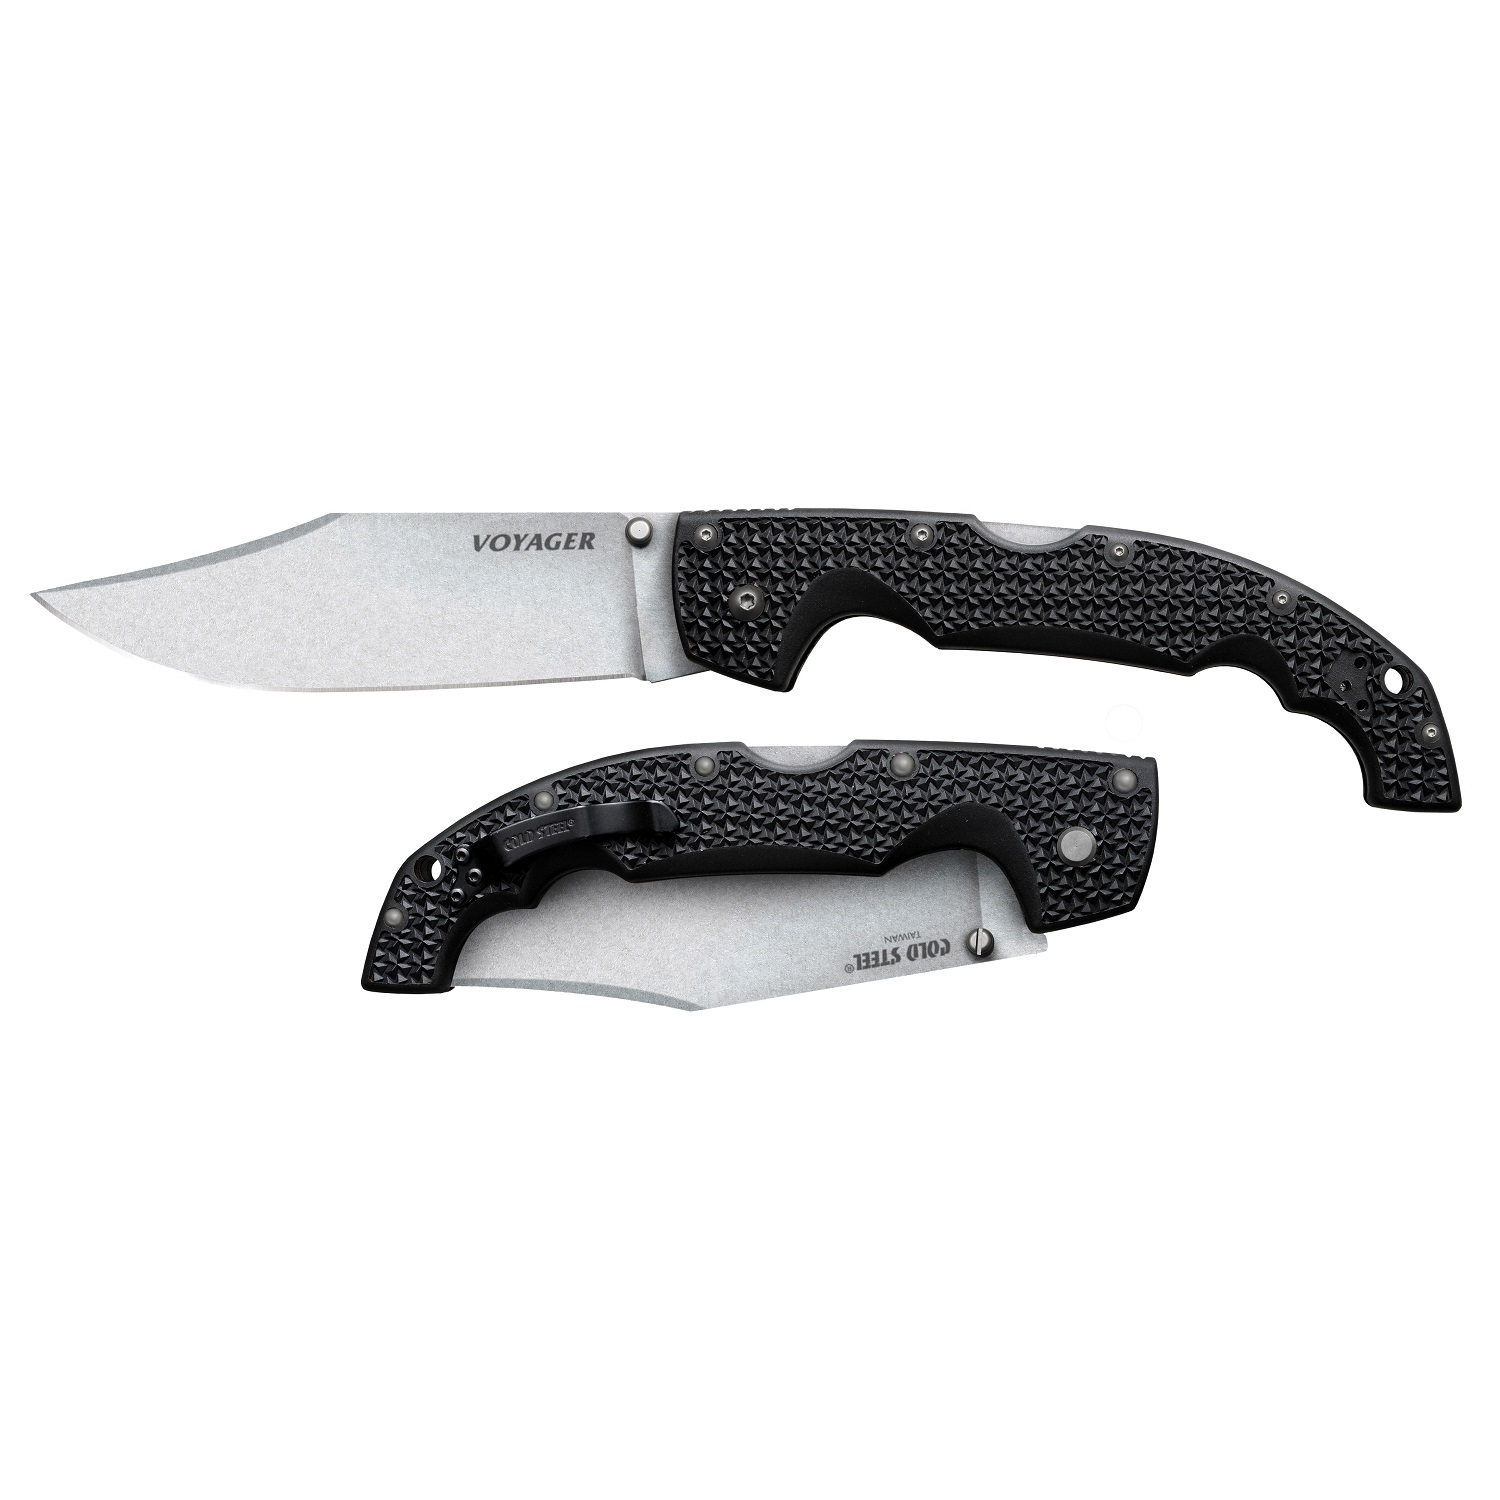 Cold Steel Voyager Clip 5.5in Plain Edge Folding Knife